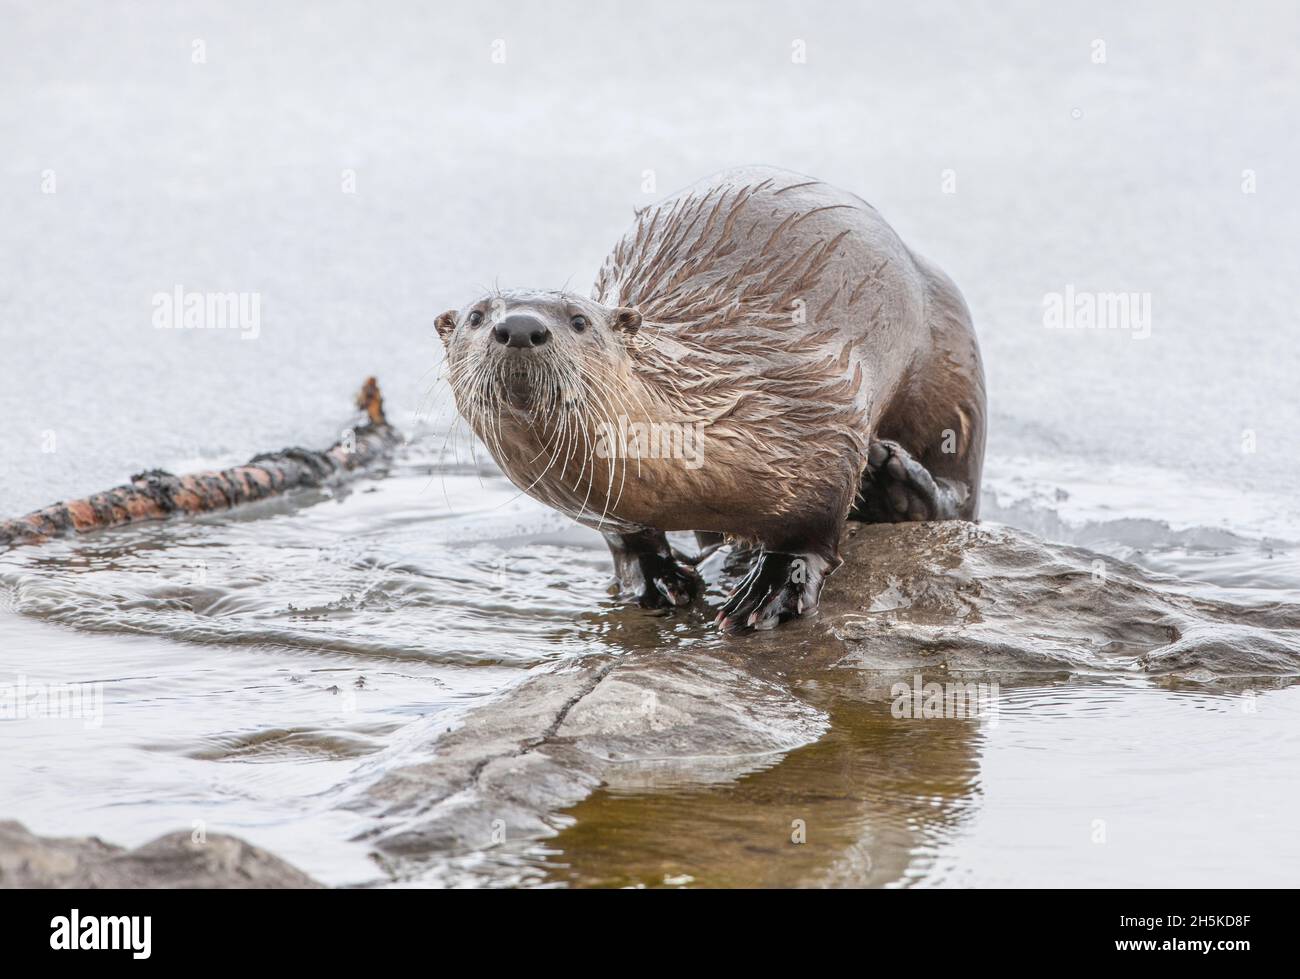 Portrait of a North American river otter (Lutra canadensis) climbing out of the water onto a rock curiously looking at camera Stock Photo